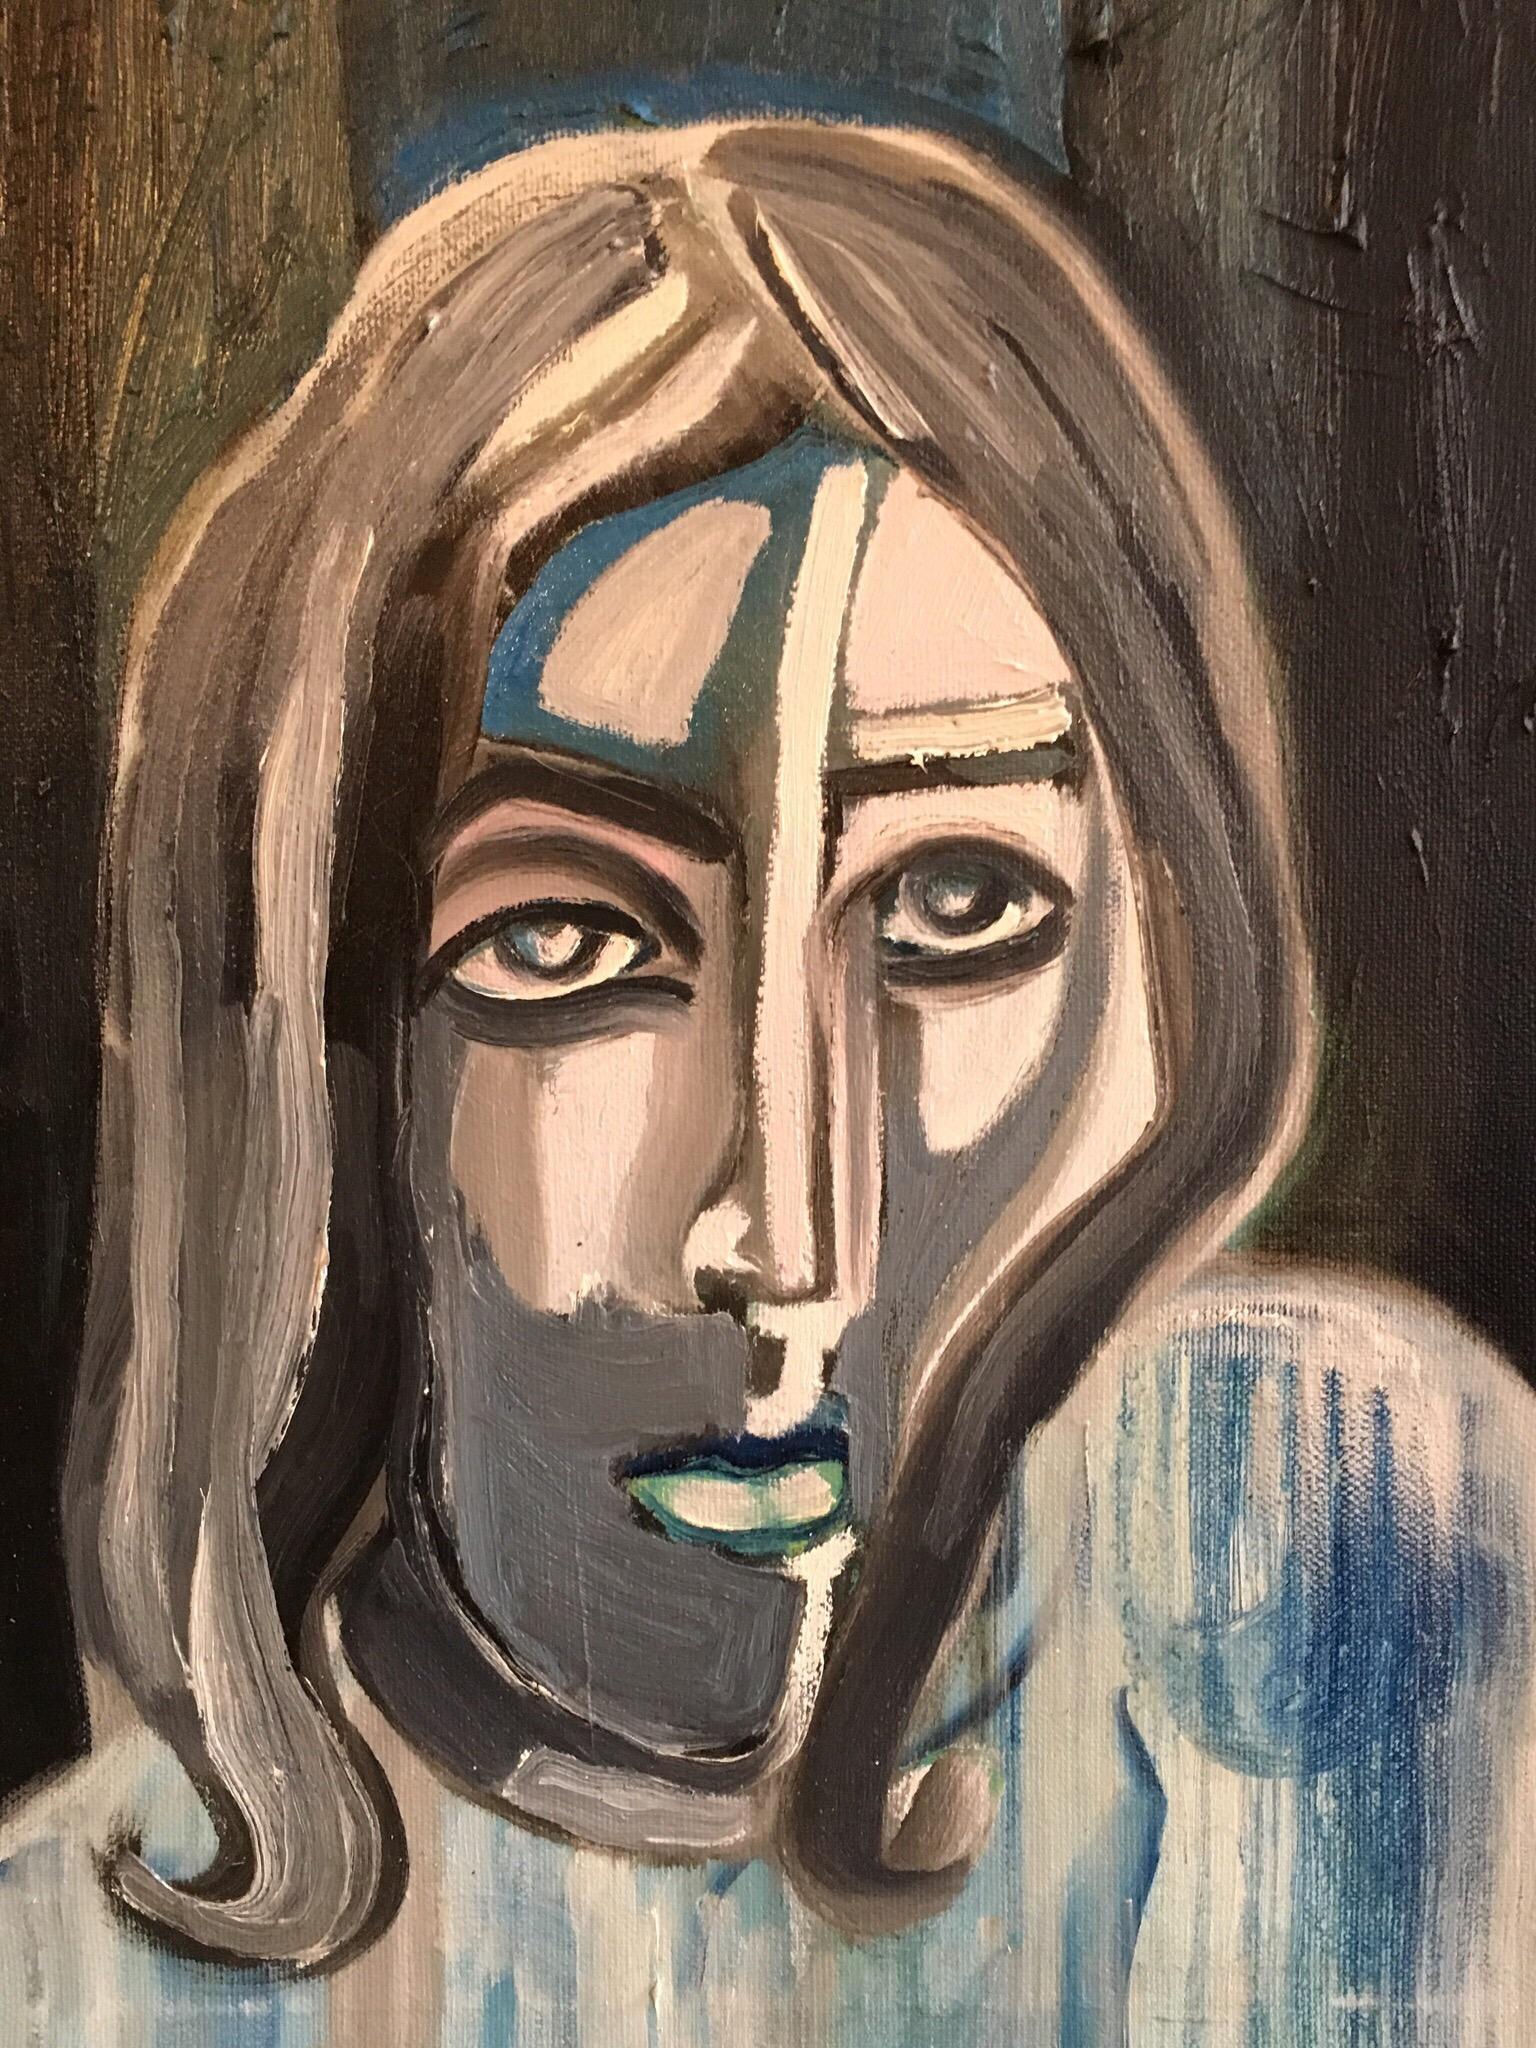 Dark Picasso Style Portrait, Cubist Abstract, Original Oil Painting, Signed 
By French artist Beatrice Werlie, early 21st Century
Titled 'Lavande' in the lower left hand corner
Oil painting on canvas, unframed
Canvas size: 18 x 15